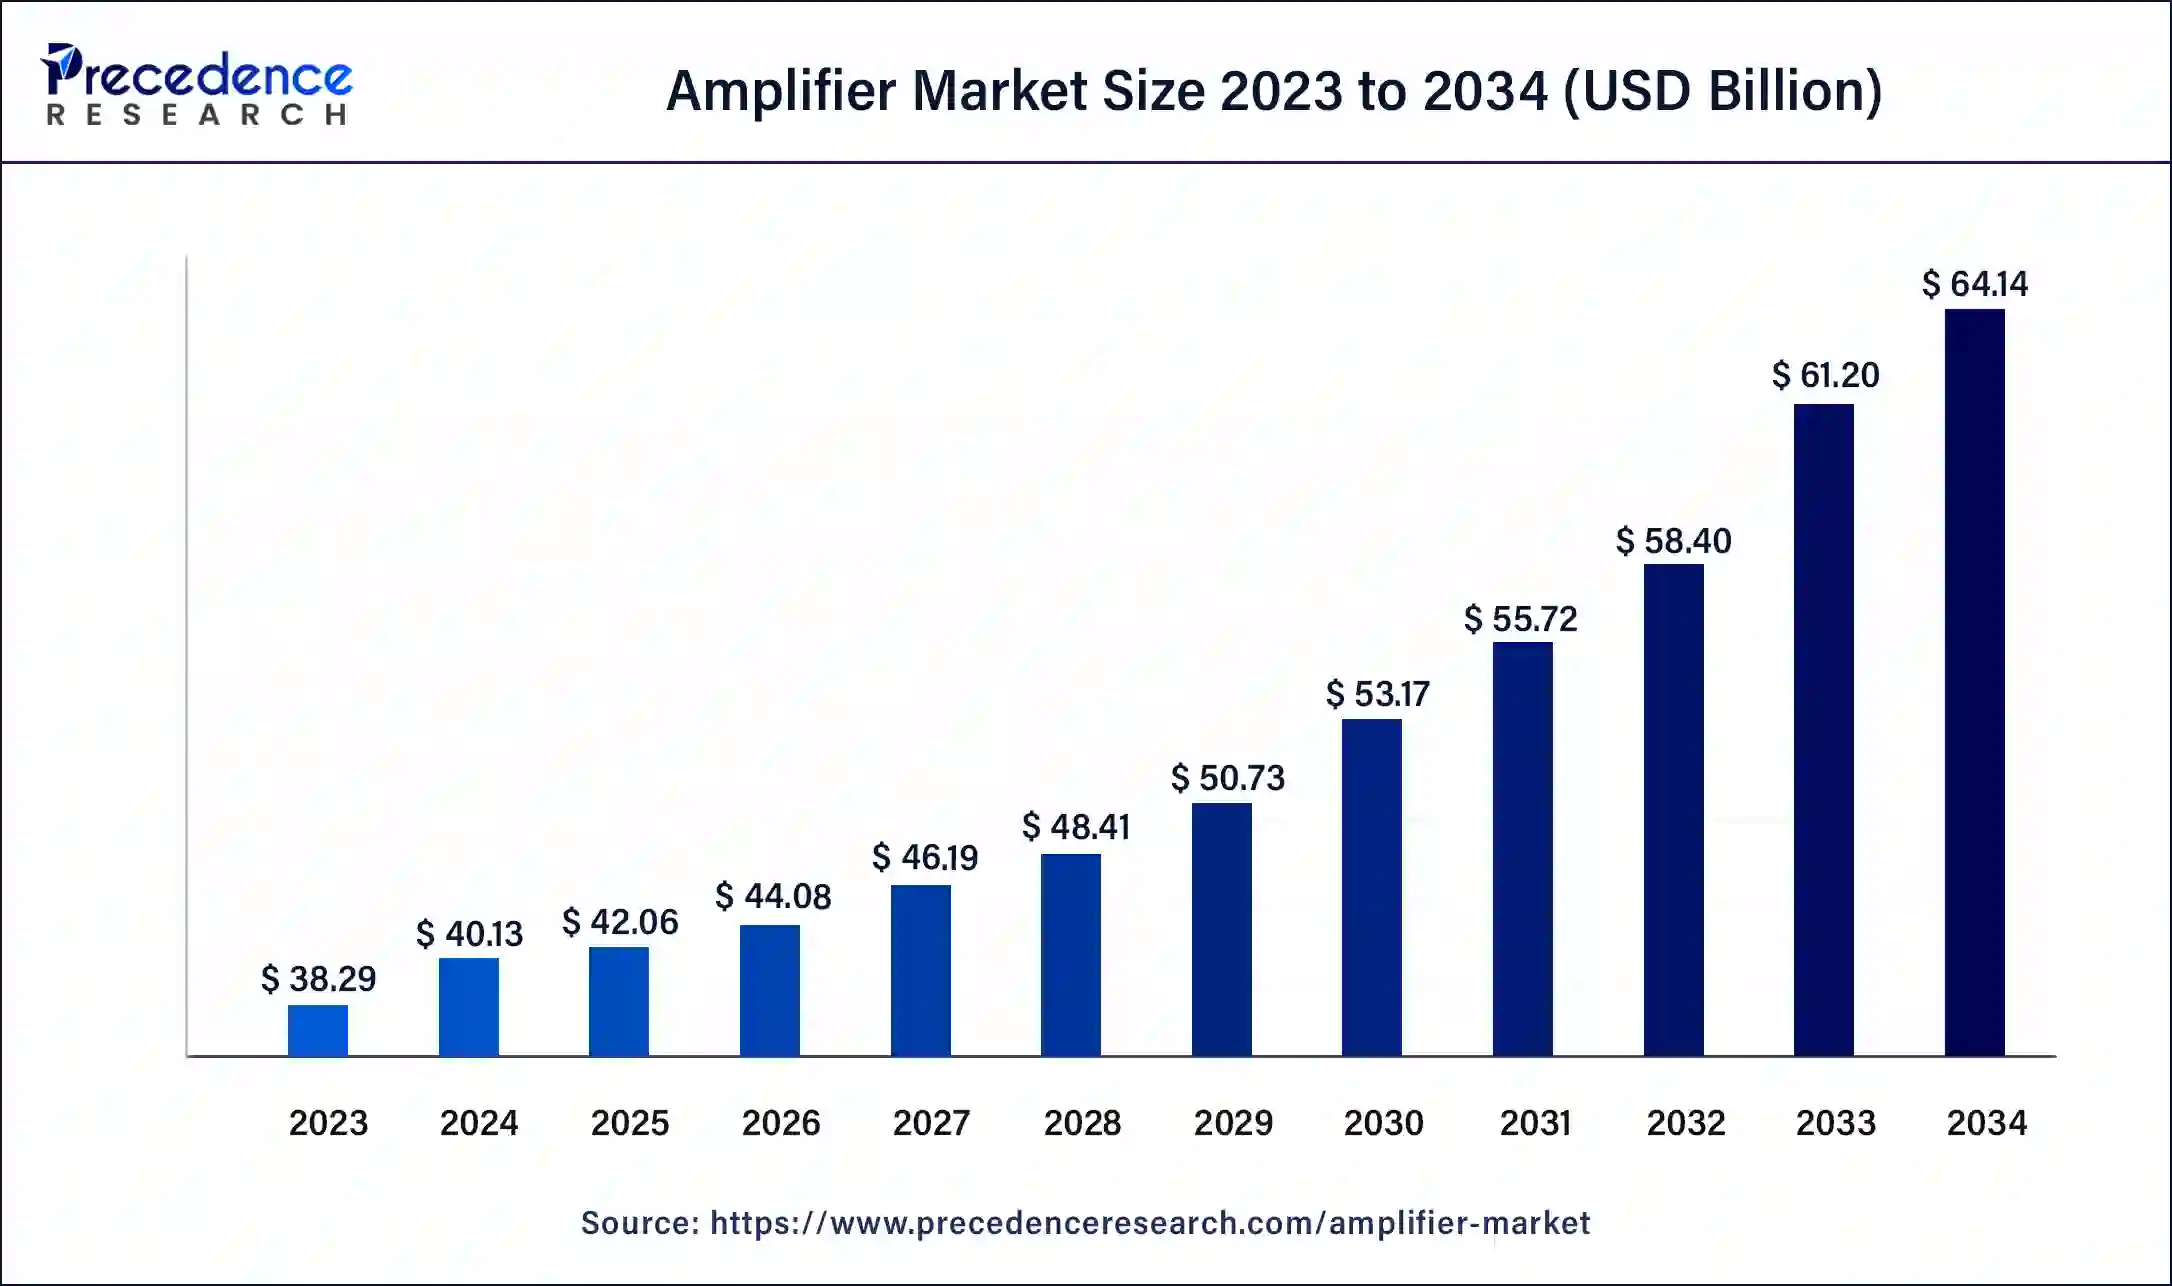 Amplifier Market Size 2024 to 2034